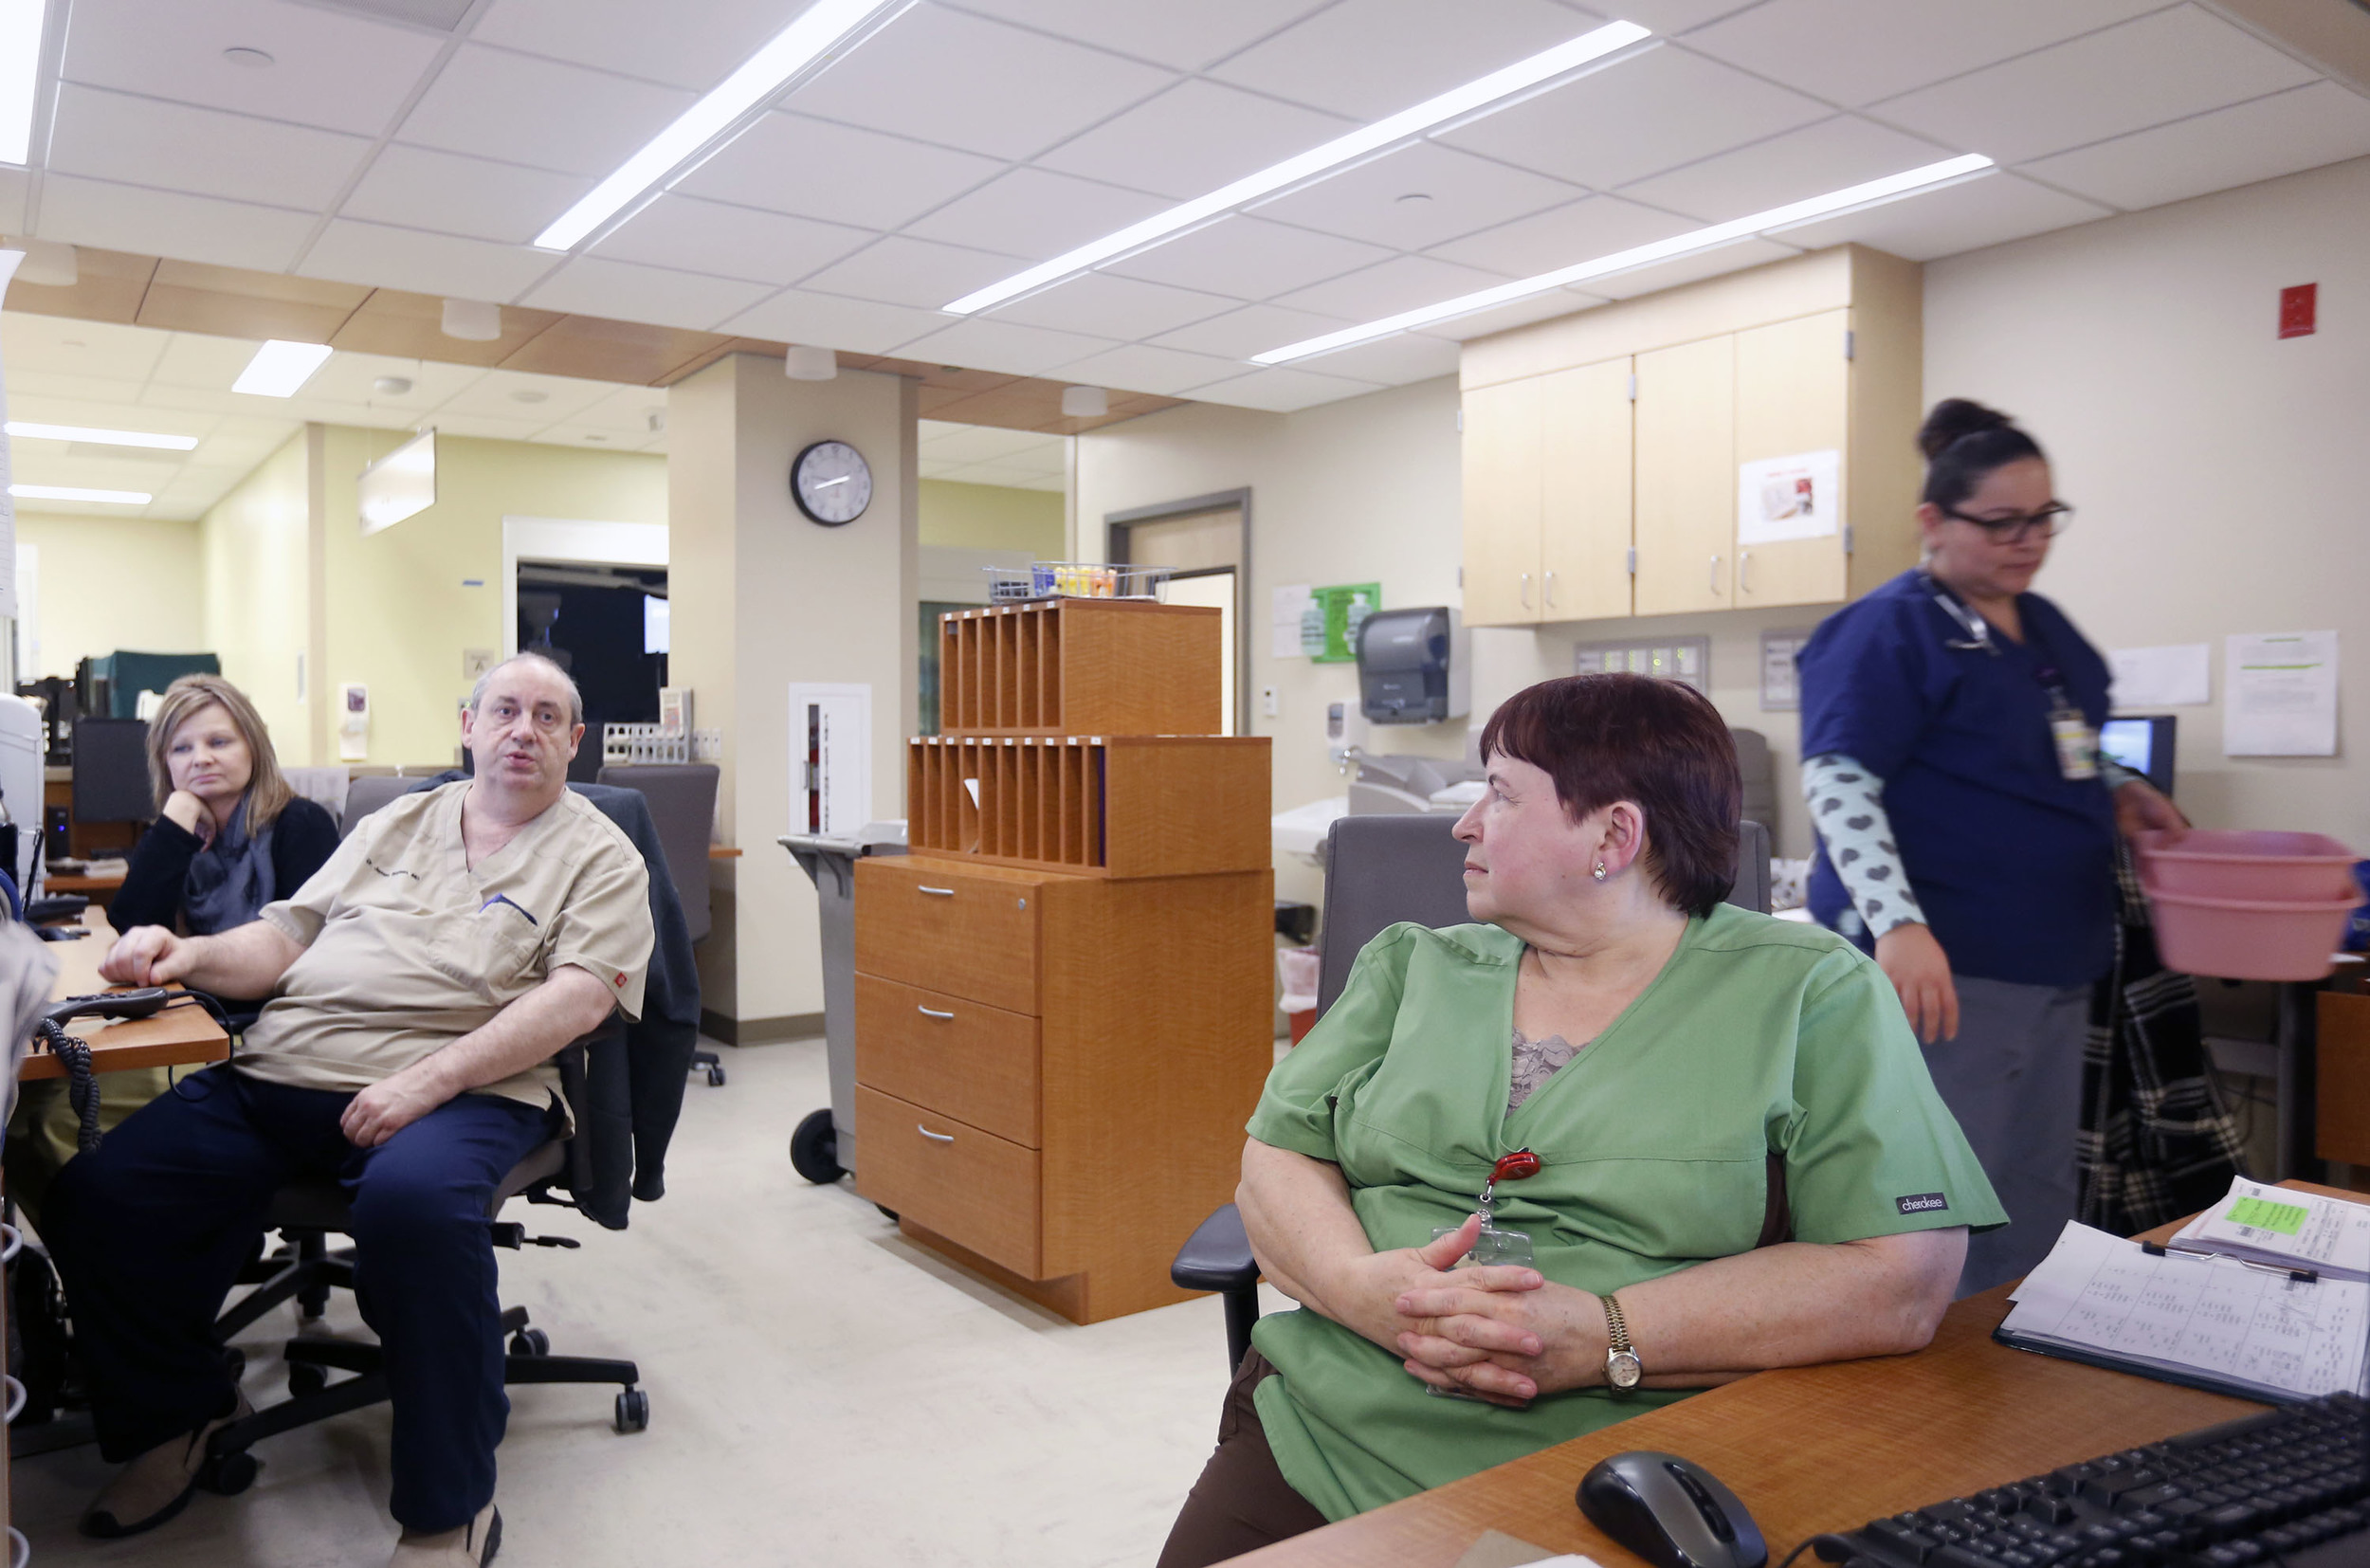   Patsy Haeg, an overnight charge nurse in the emergency department at Trios Southridge Hospital in Kennewick, talks with coworkers during the 1 a.m. hour  